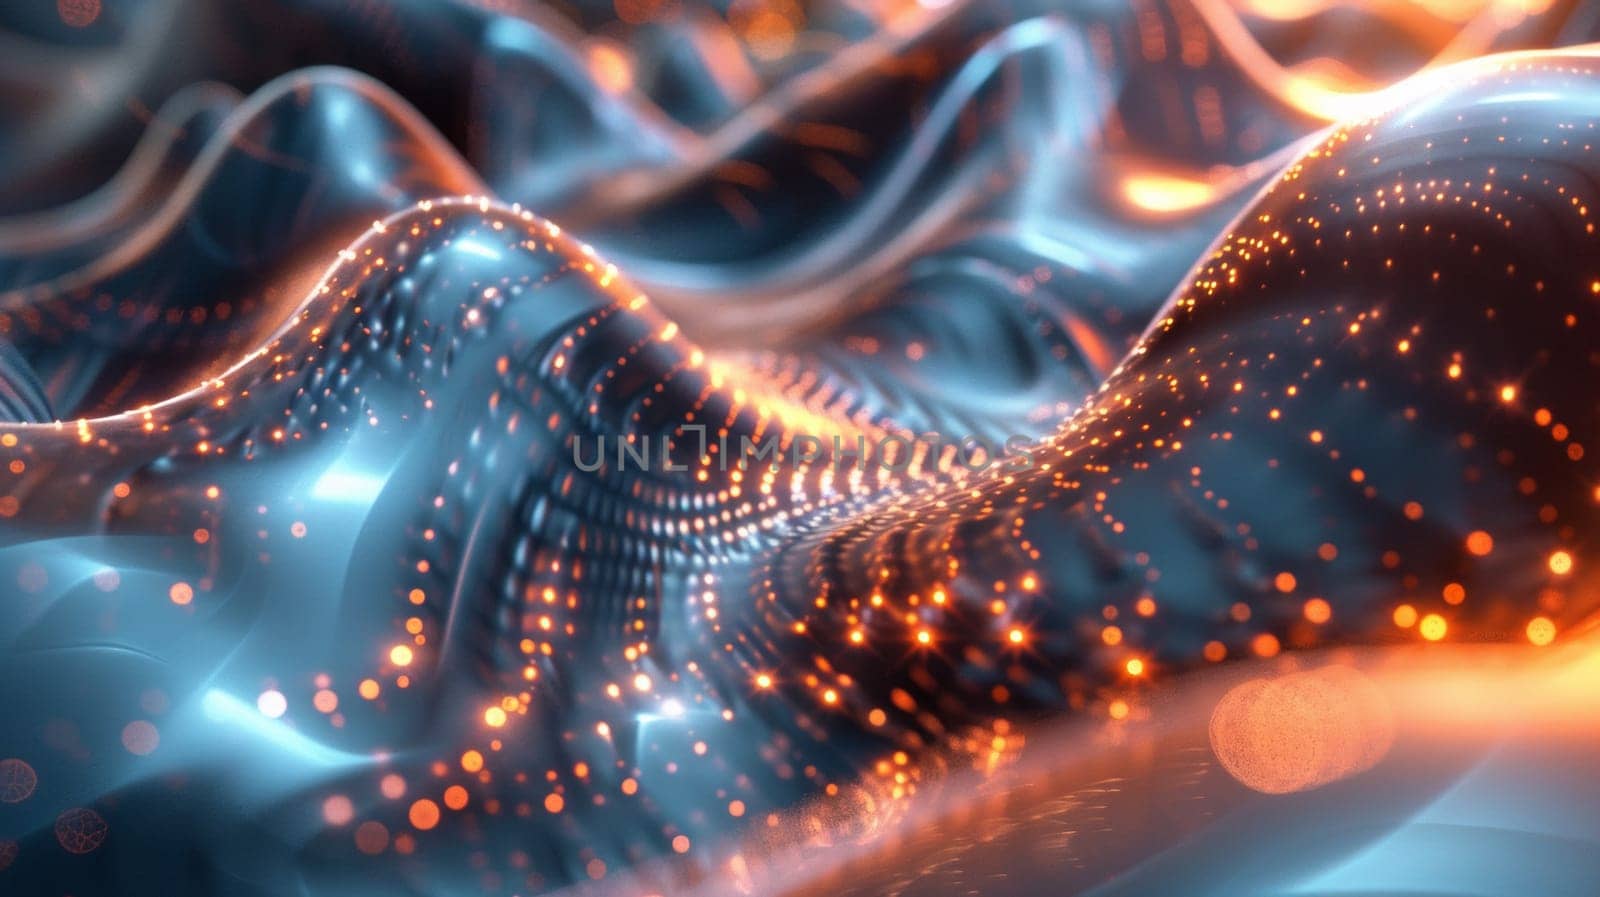 A close up of a futuristic looking object with glowing lights, AI by starush